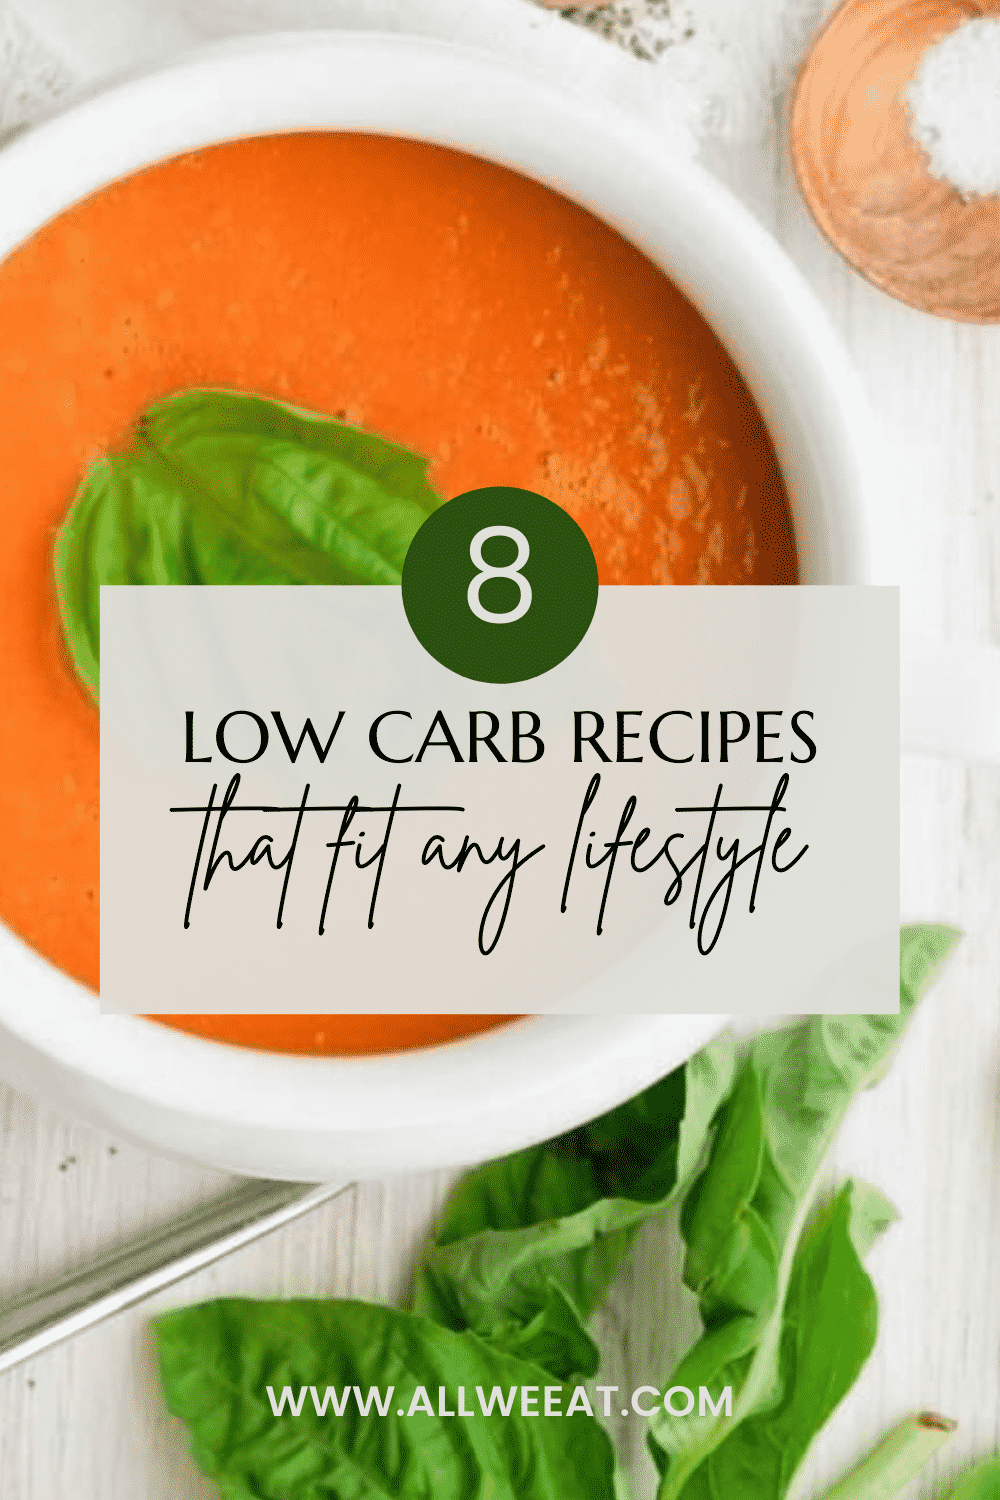 8-low-carb-recipes-that-fit-any-lifestyle-title-page-with-tomato-soup-in-background